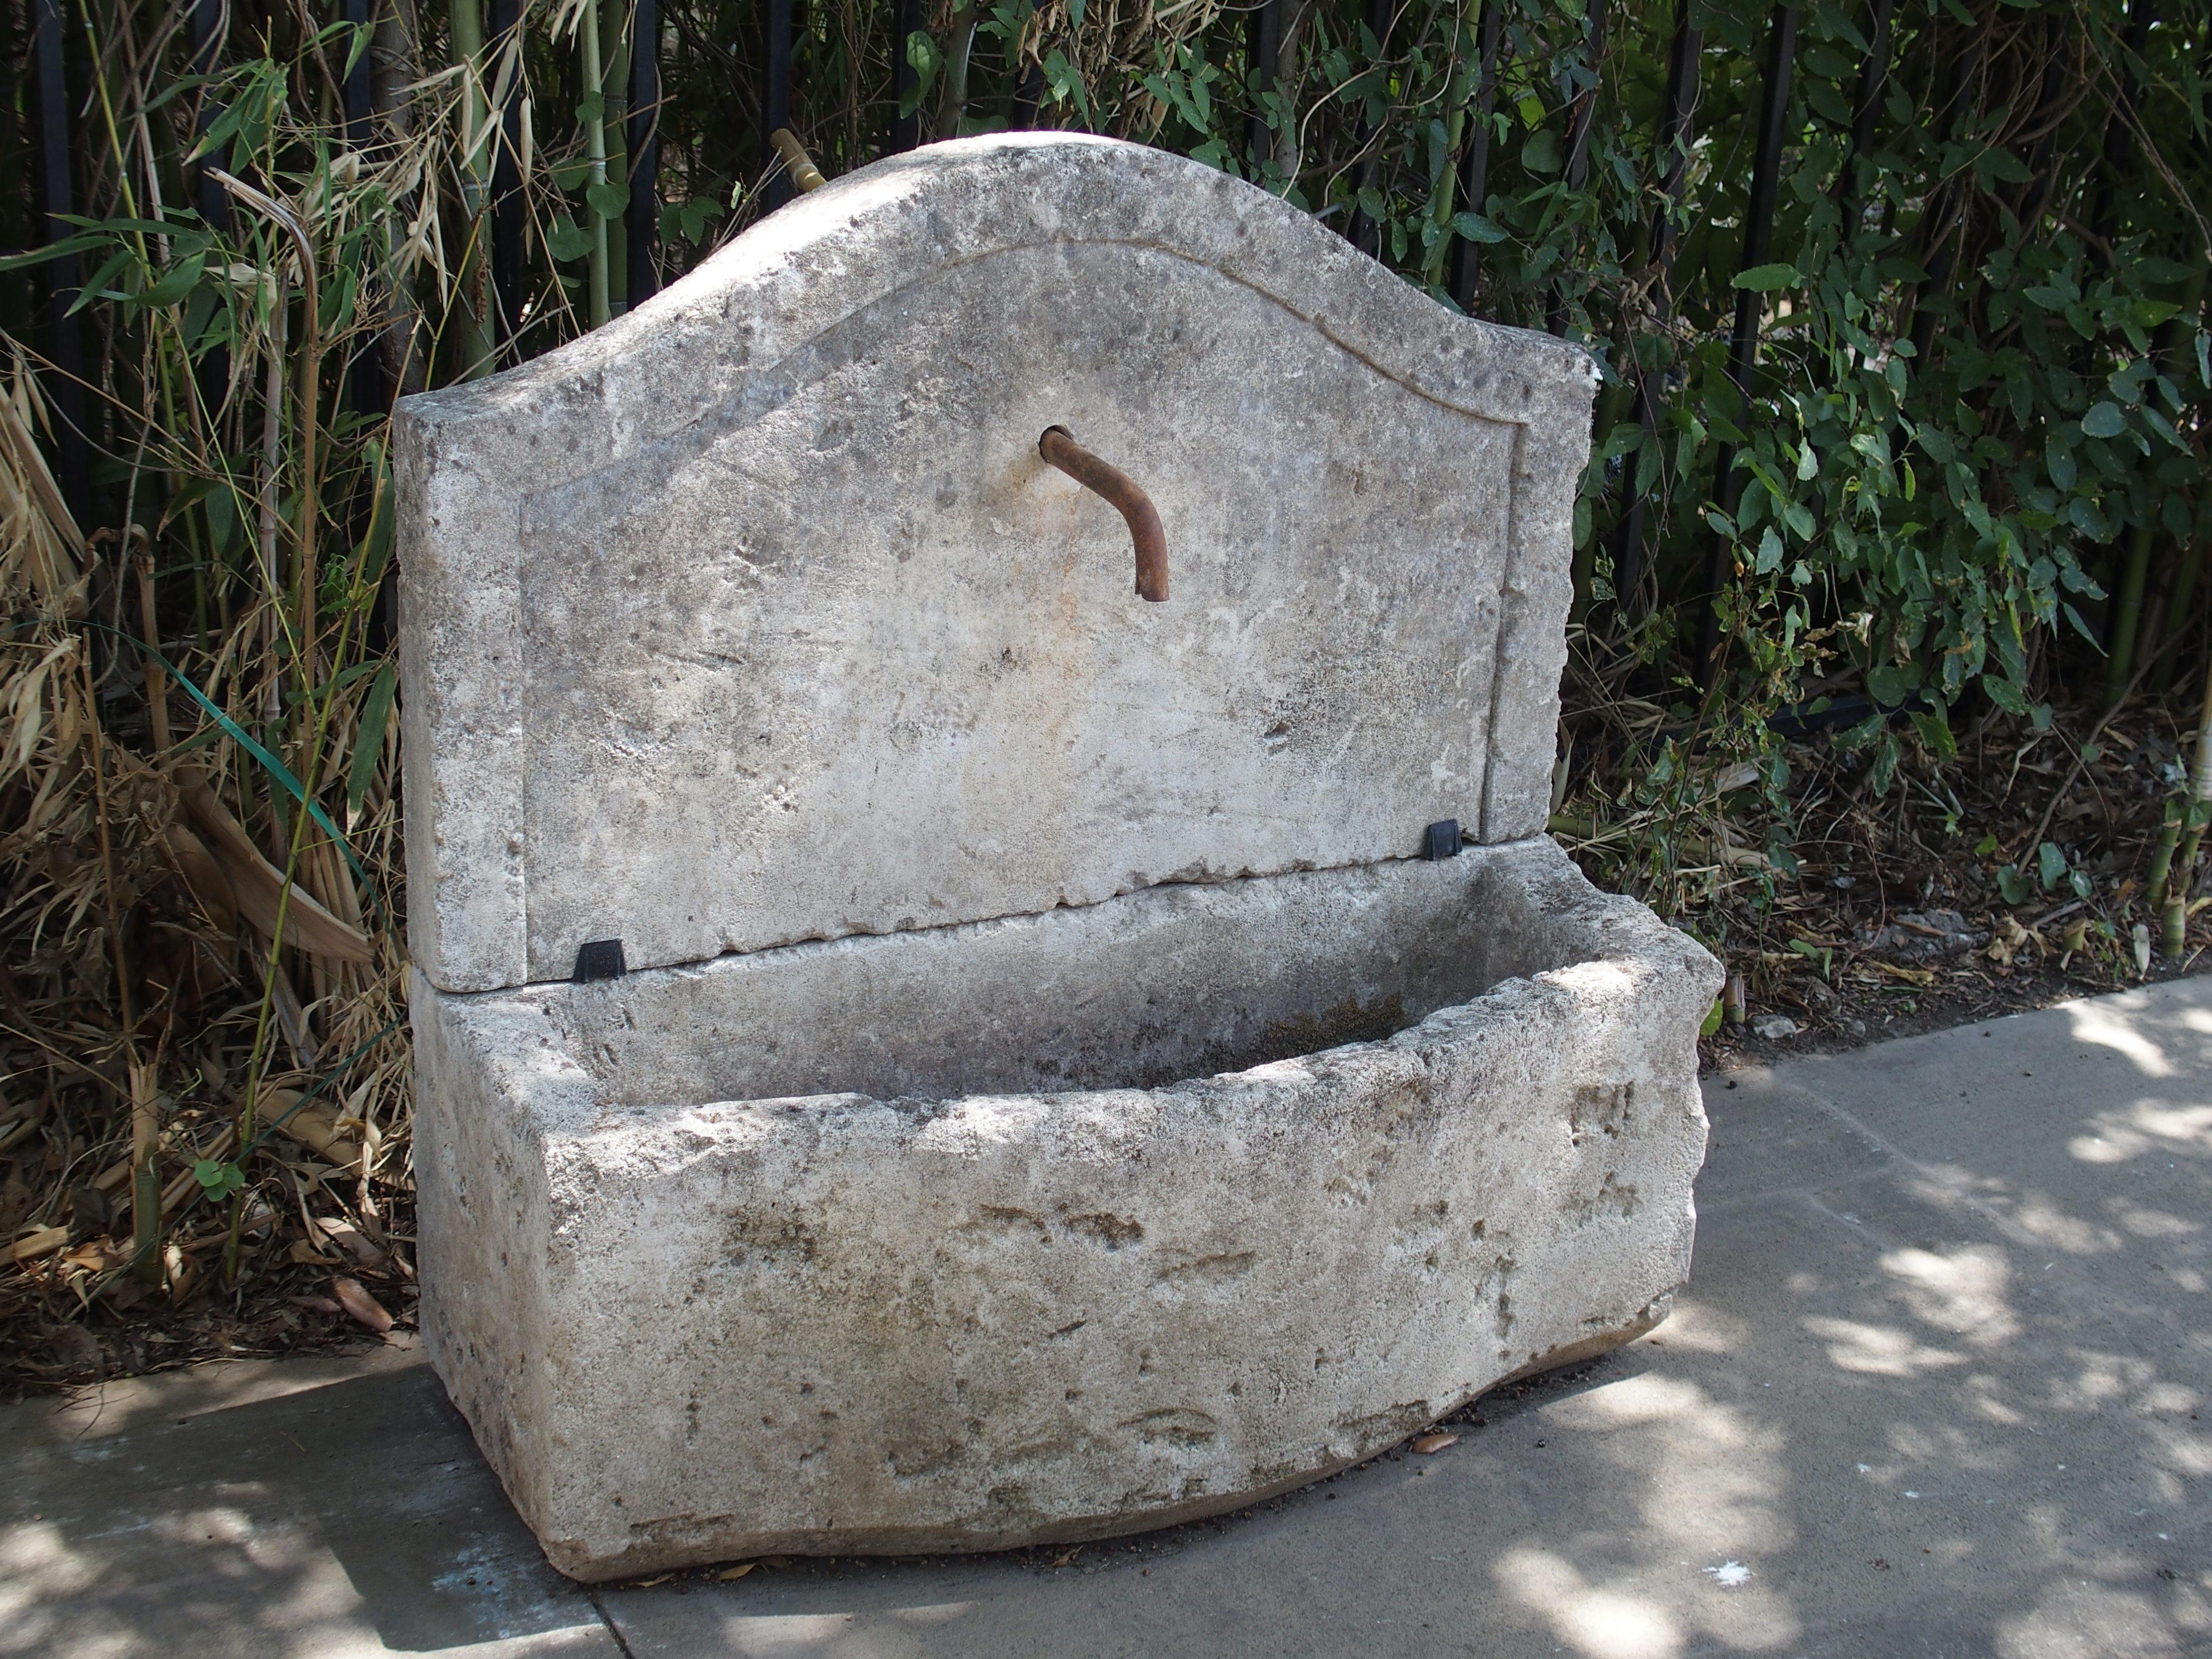 This small hand-carved, rustic wall fountain was made in France with local limestone and looks as if it is hundreds of years of old. The stone has spent several years in the elements, and it has a mixed color of greys, white, and black, that can